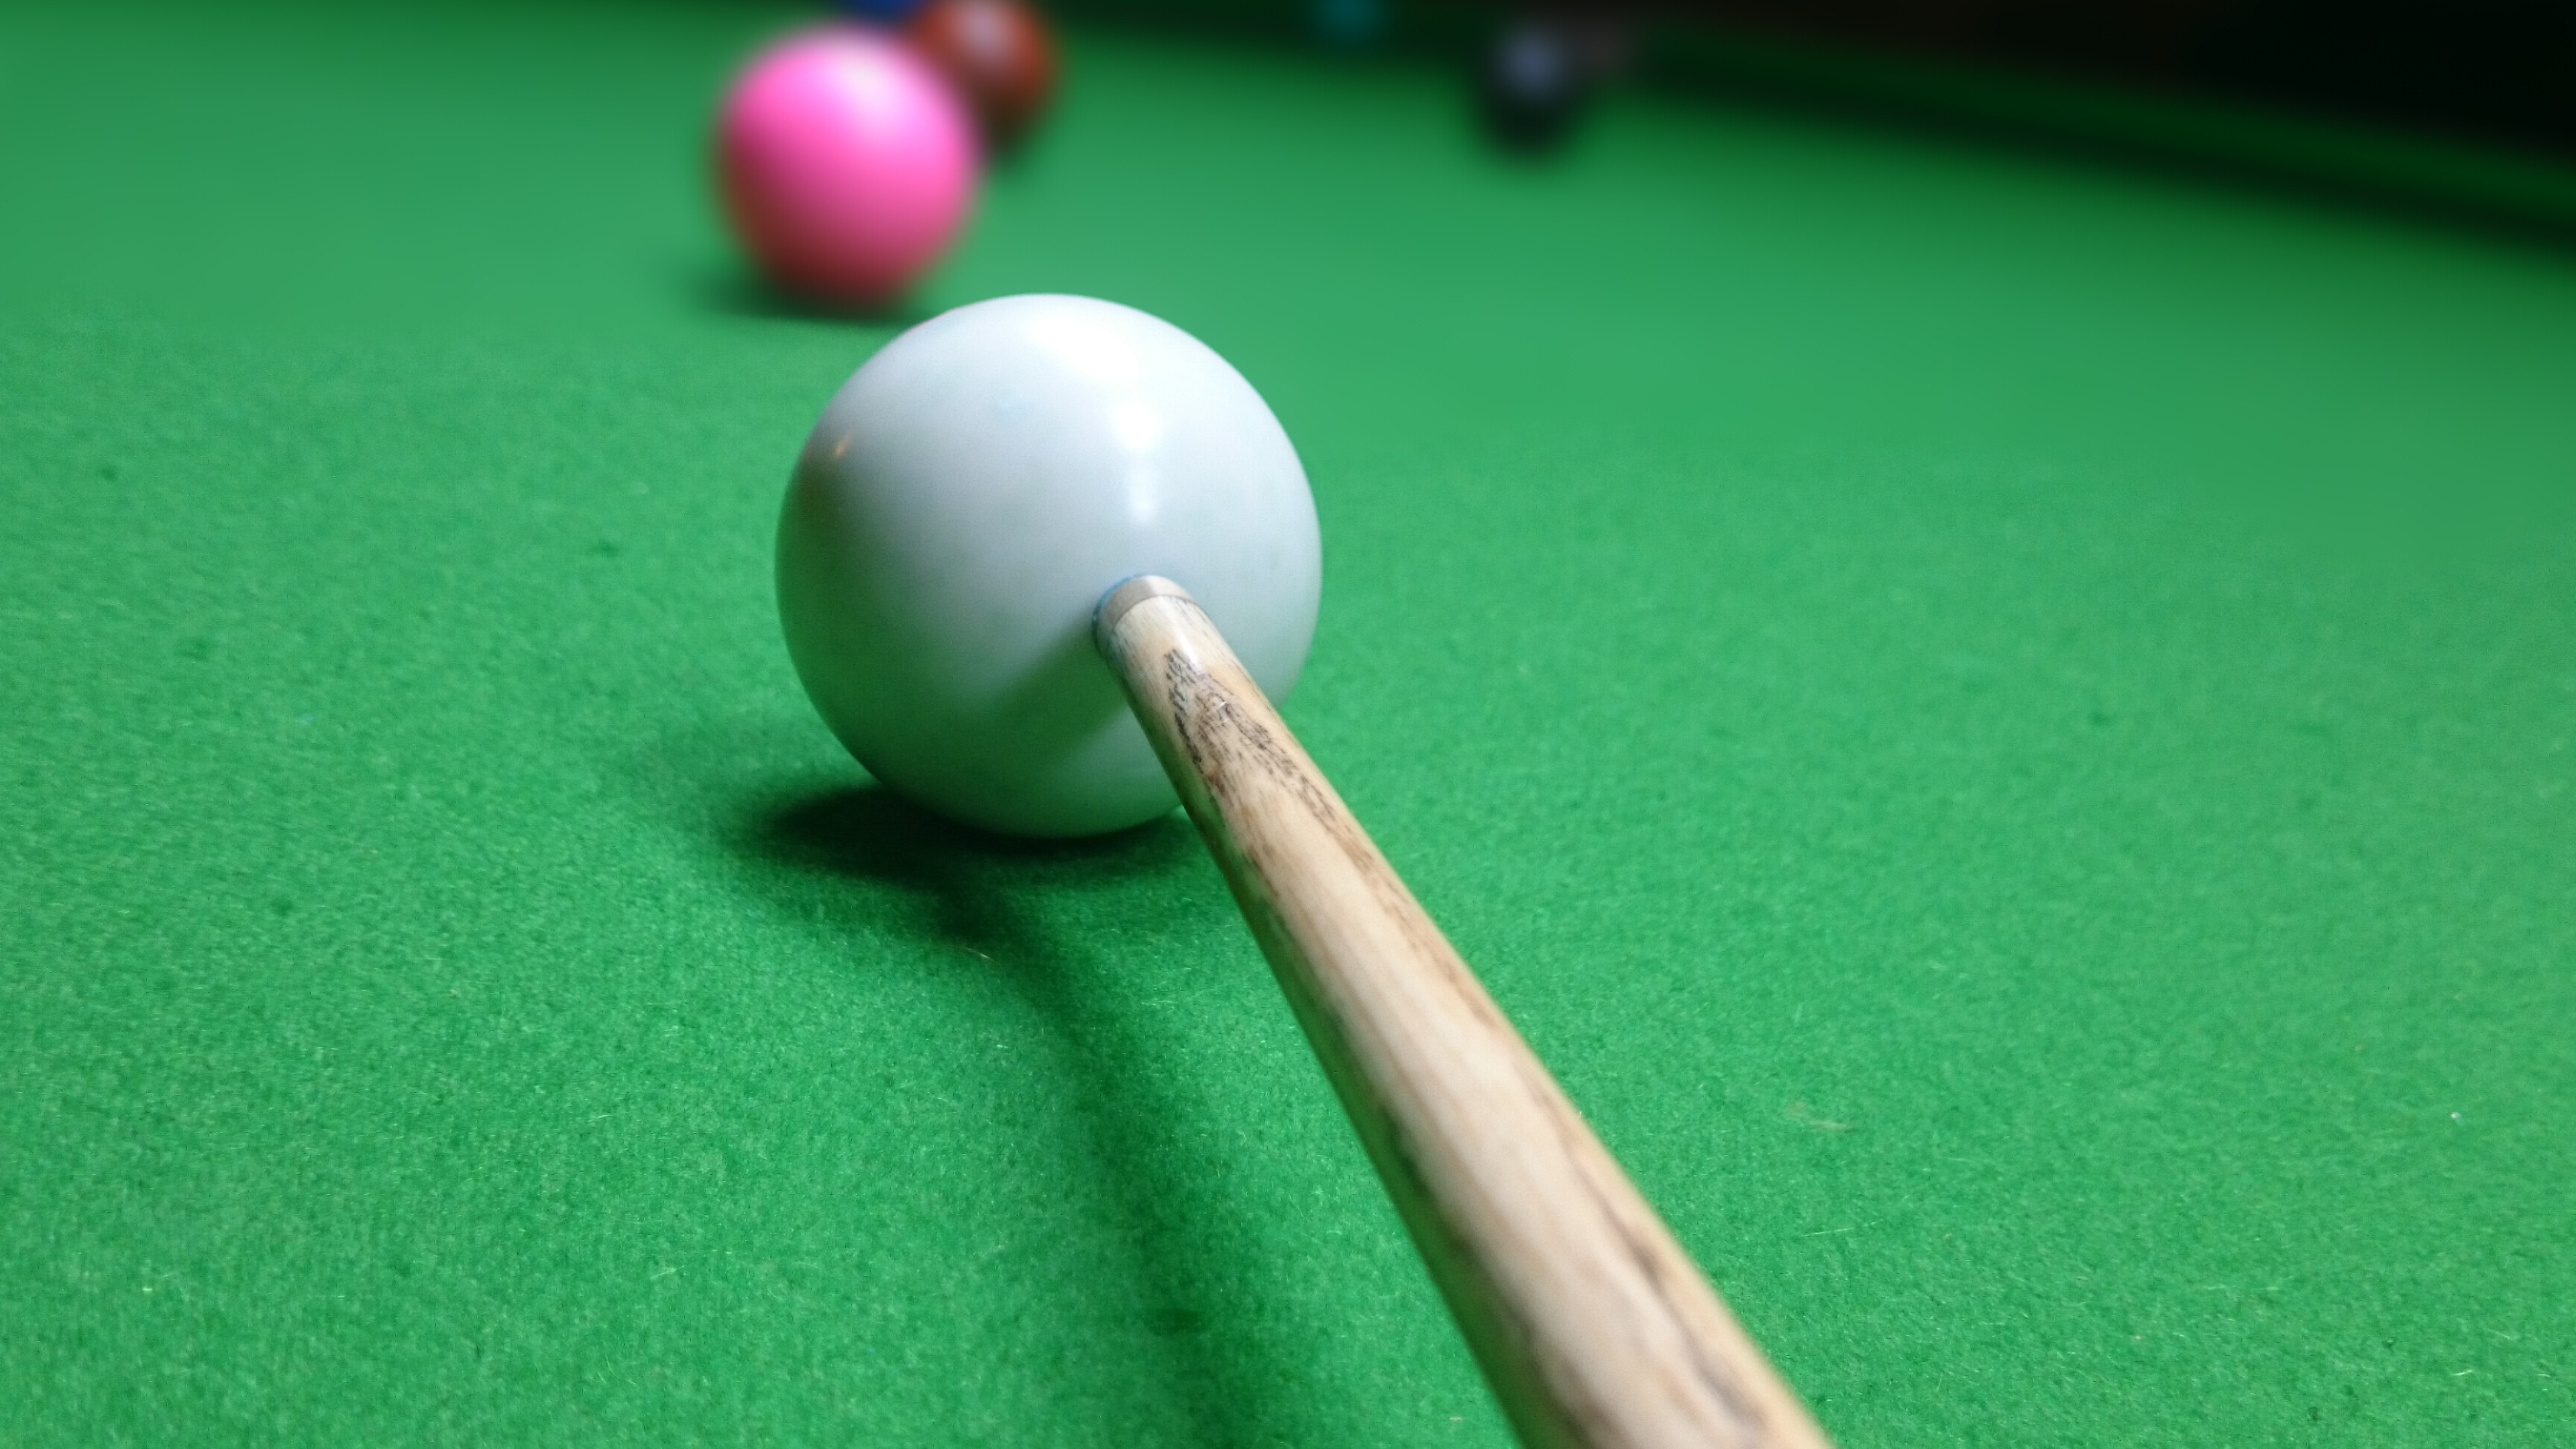 Billiards: Snooker balls, A white cue ball and a pink object ball, Recreational activity and sport, Pool game. 3840x2160 4K Background.